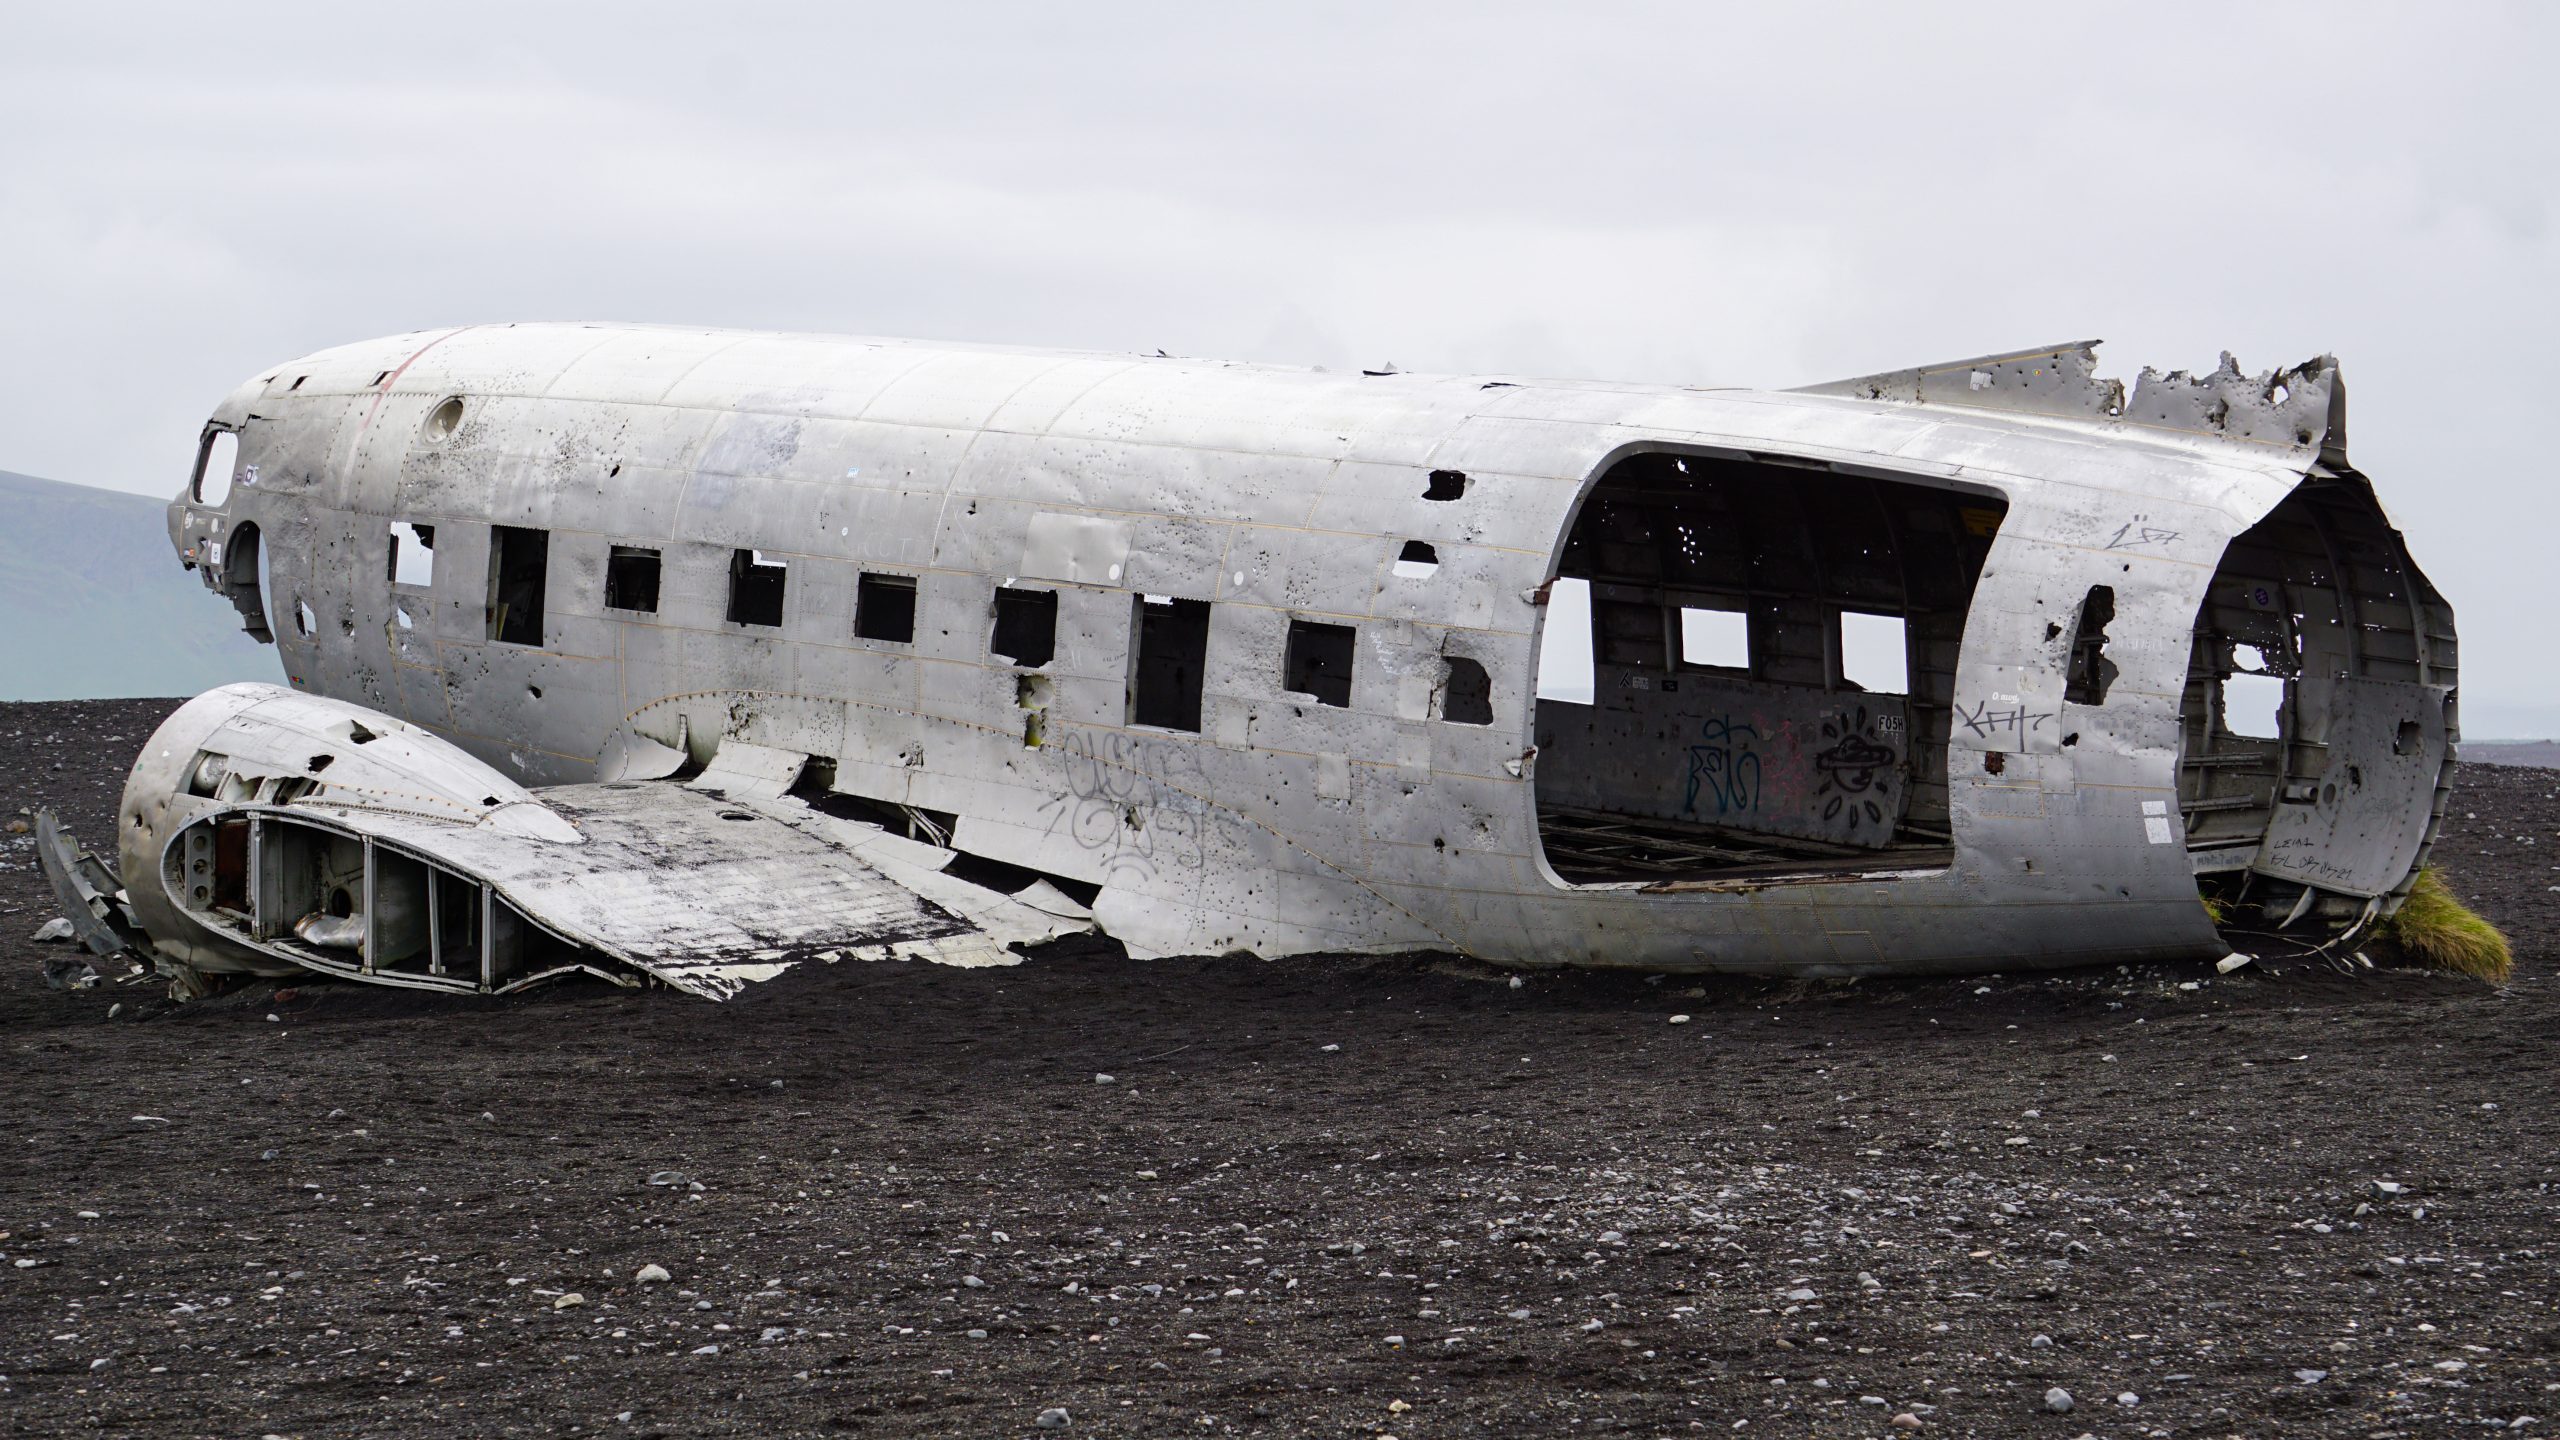 An airplane wreckage on a black sand beach in Iceland